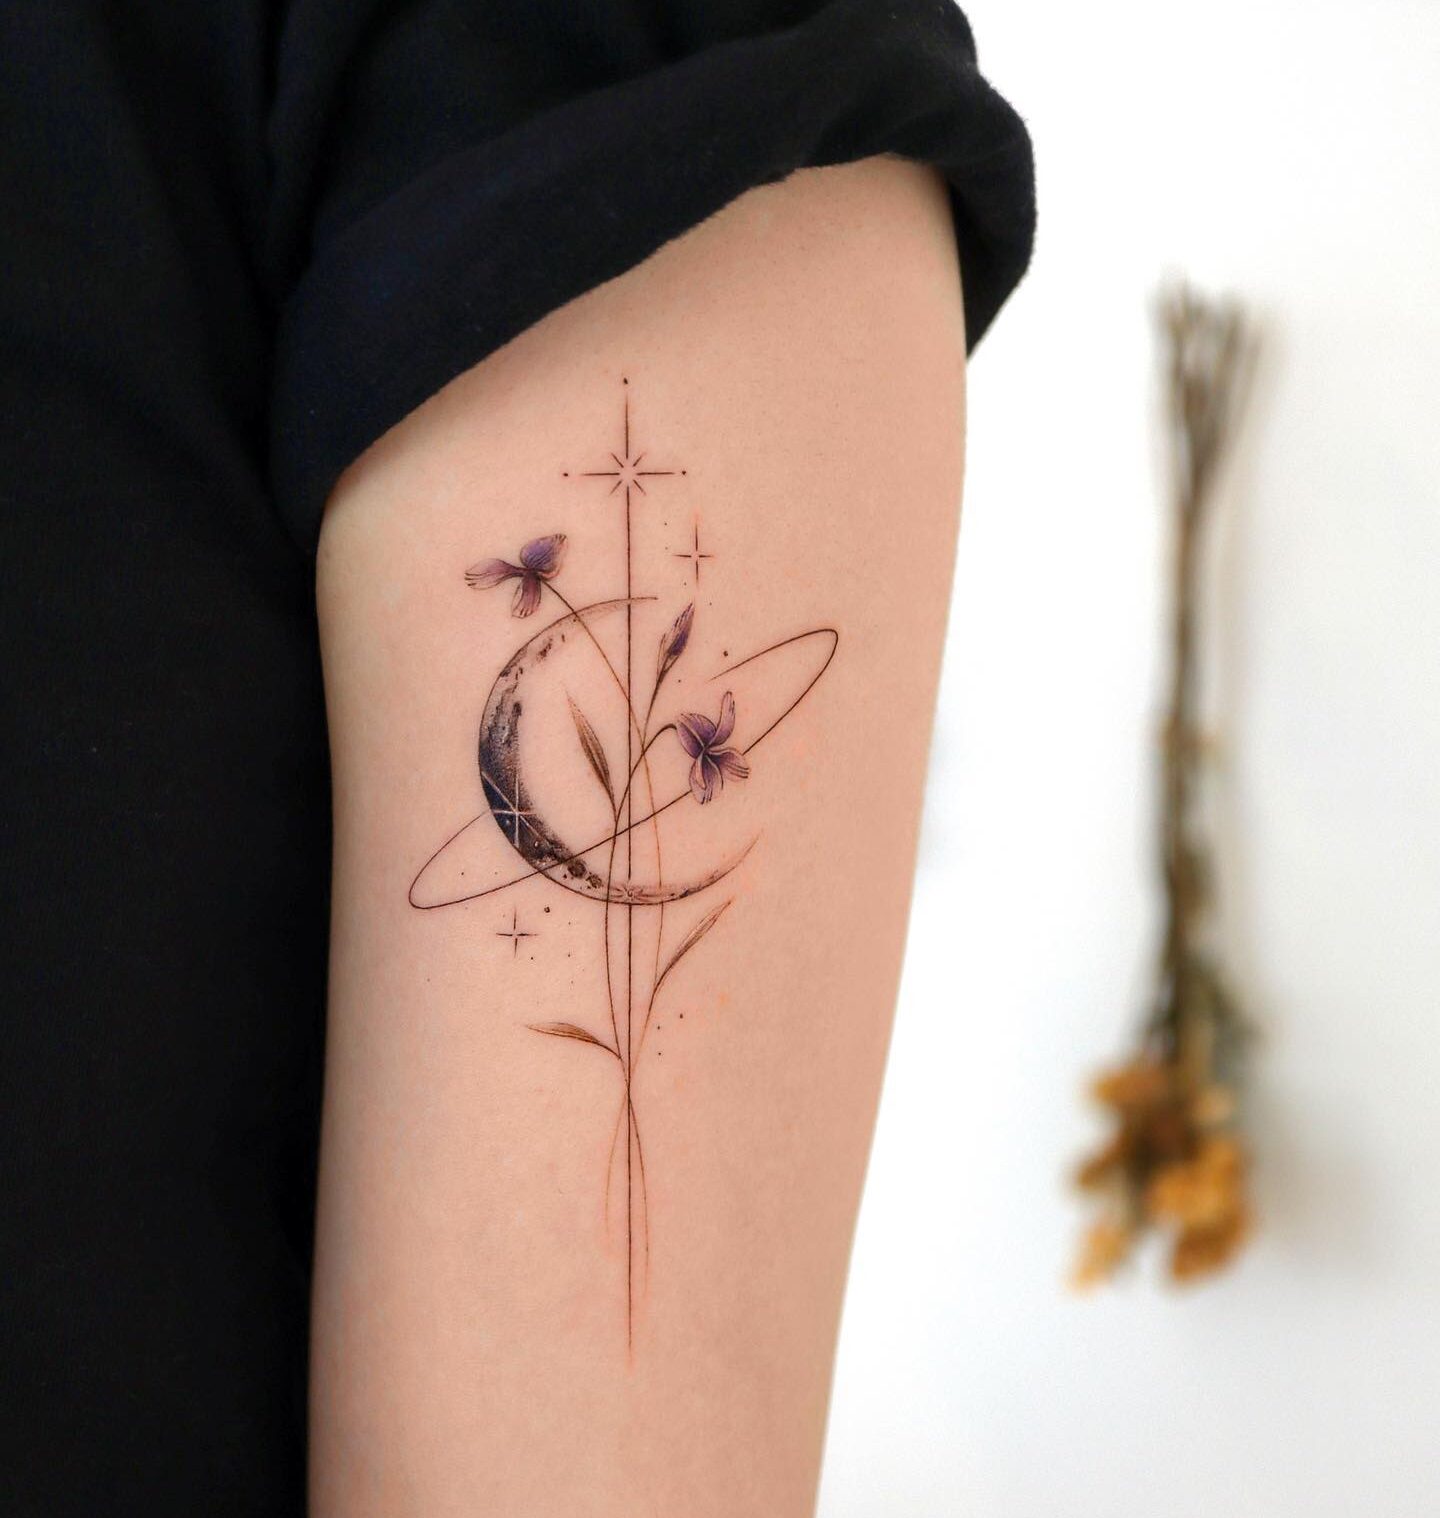 Planet Saturn and flower tattoo on the outer arm